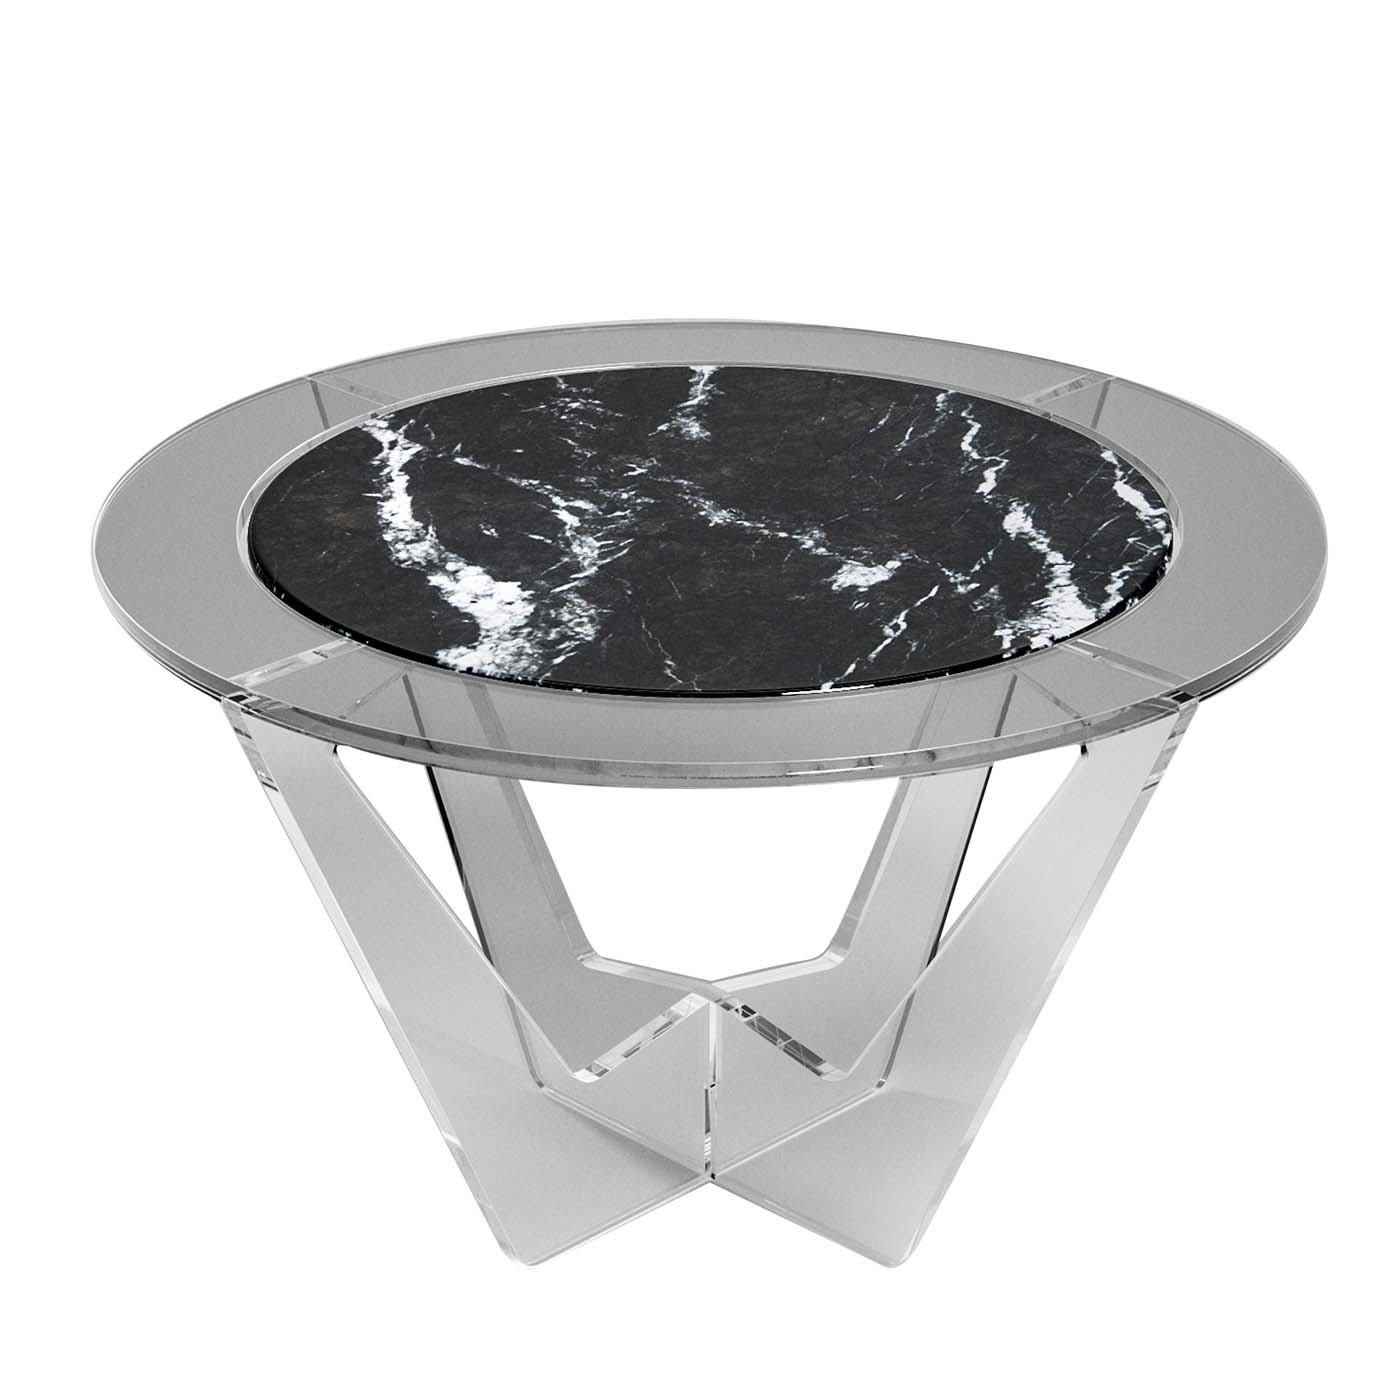 Hac Gray Round Coffee Table with Gray Carnico Marble Top - Madea Milano